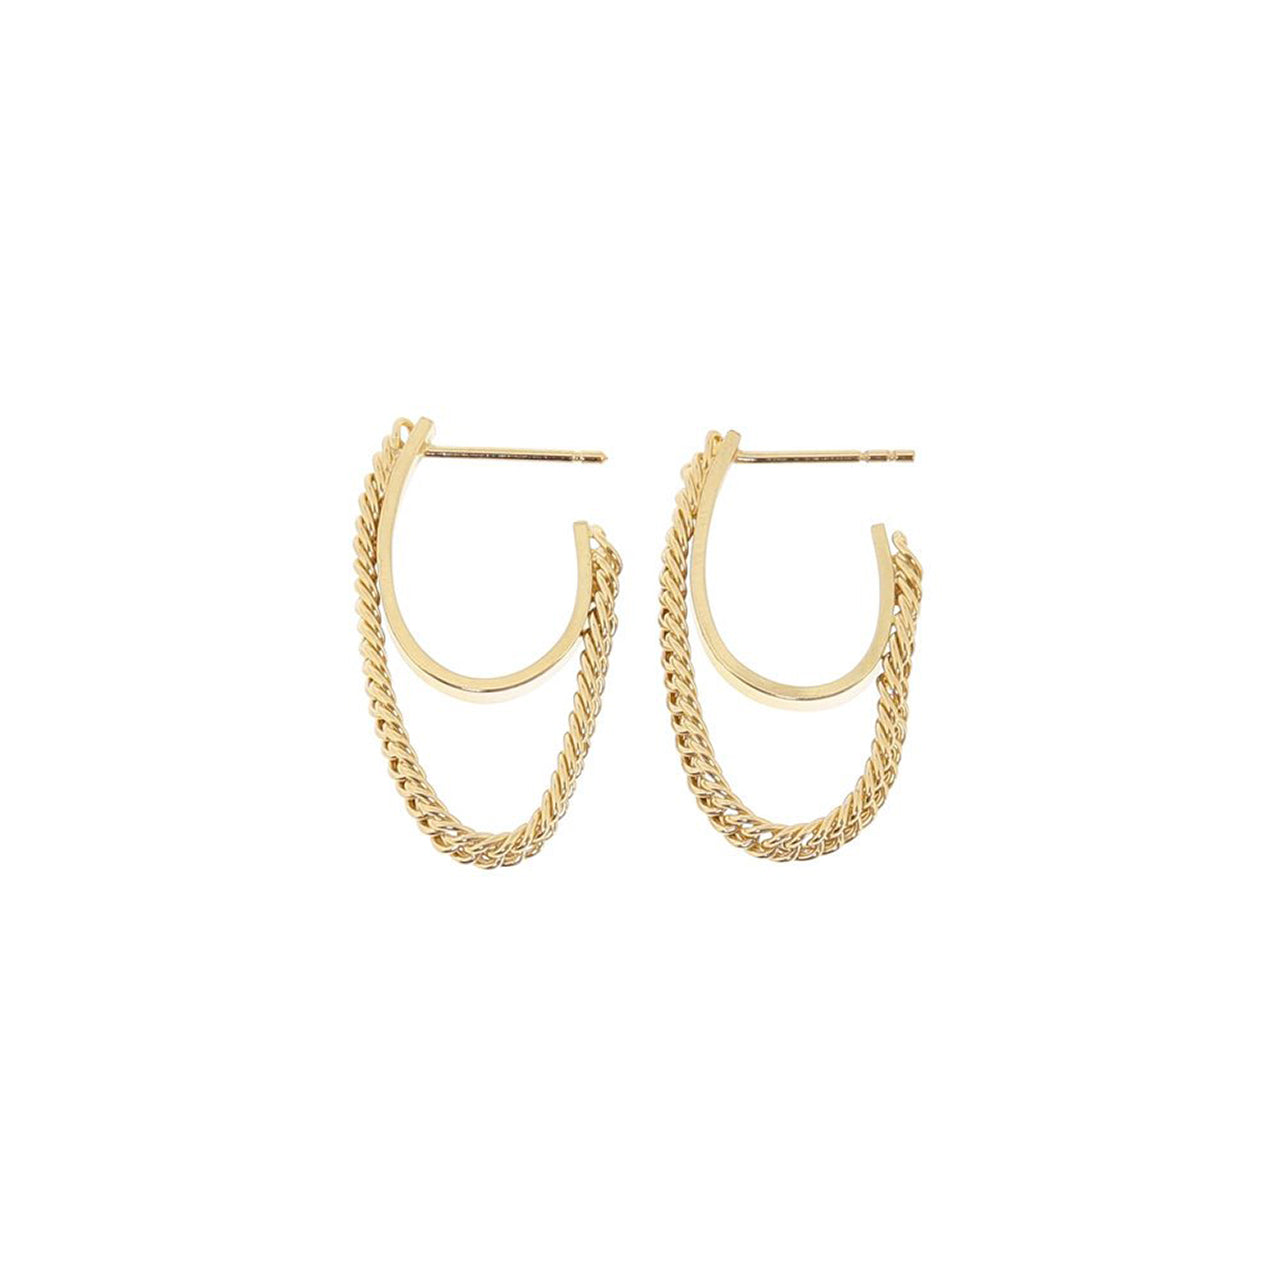 Flexible wire hoop earrings featuring faceted beaded details and gold  accents. Approximately 2